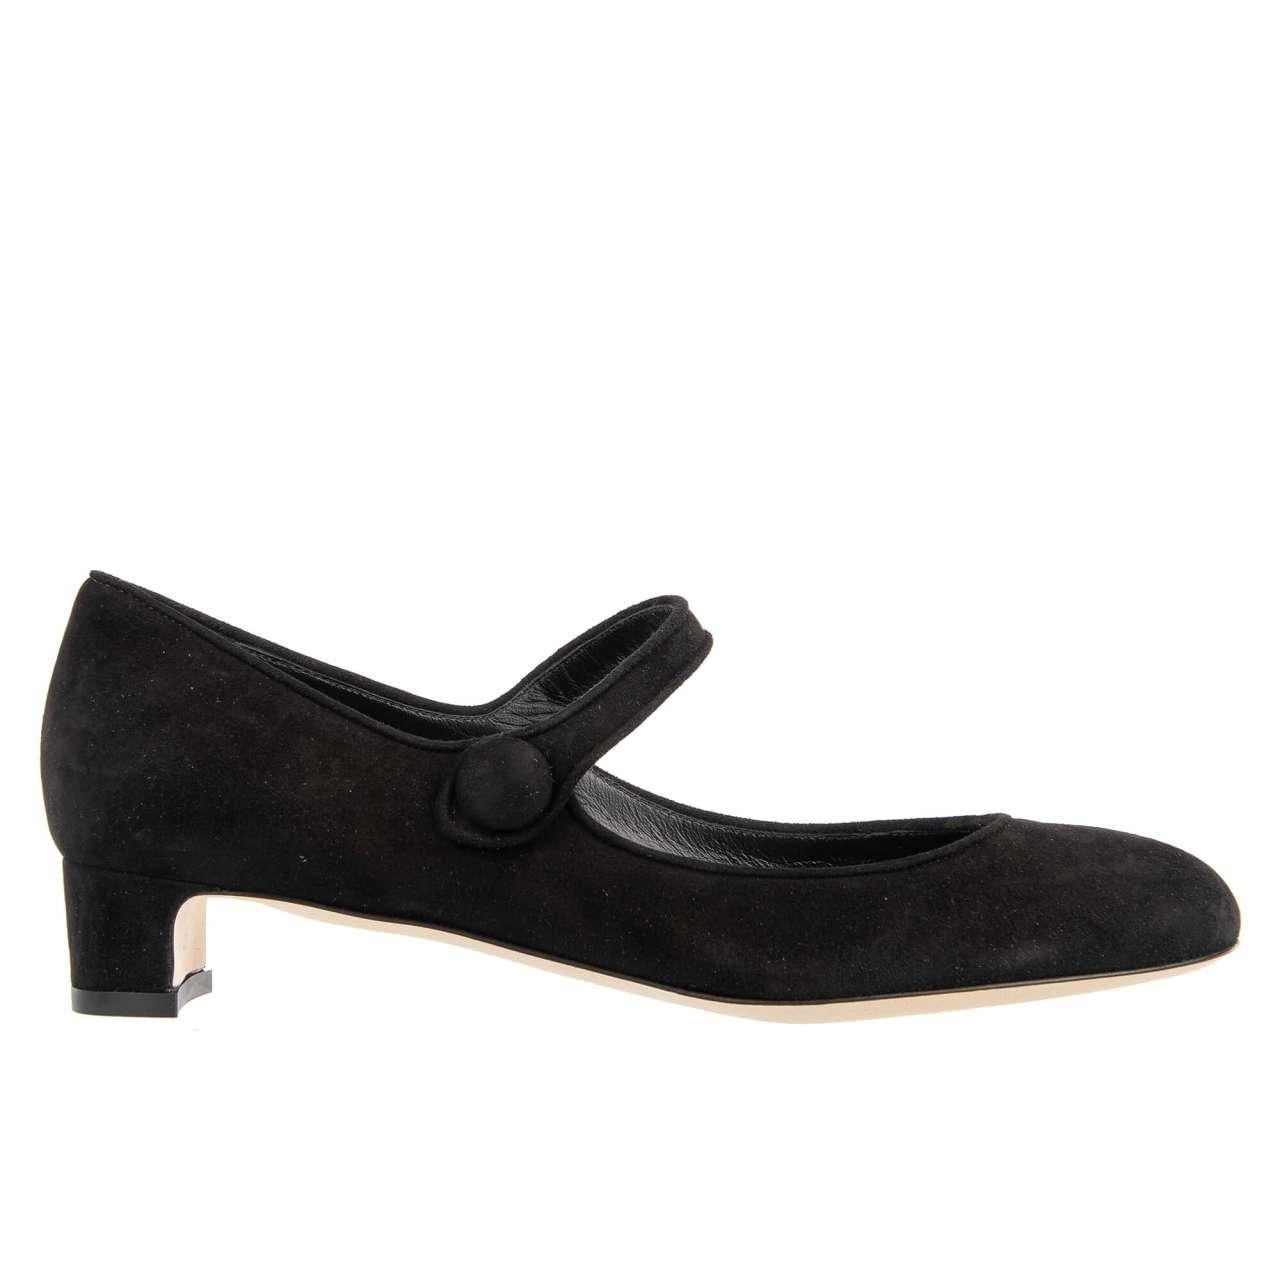 - Suede leather Mary Jane Pumps VALLY in black by DOLCE & GABBANA - New with Box - MADE IN ITALY - With elastic button strap - Model: CD1186-B1275-80999 - Material: 100% Goat leather - Inner Material: leather - Sole: Leather - Color: Black - Heel